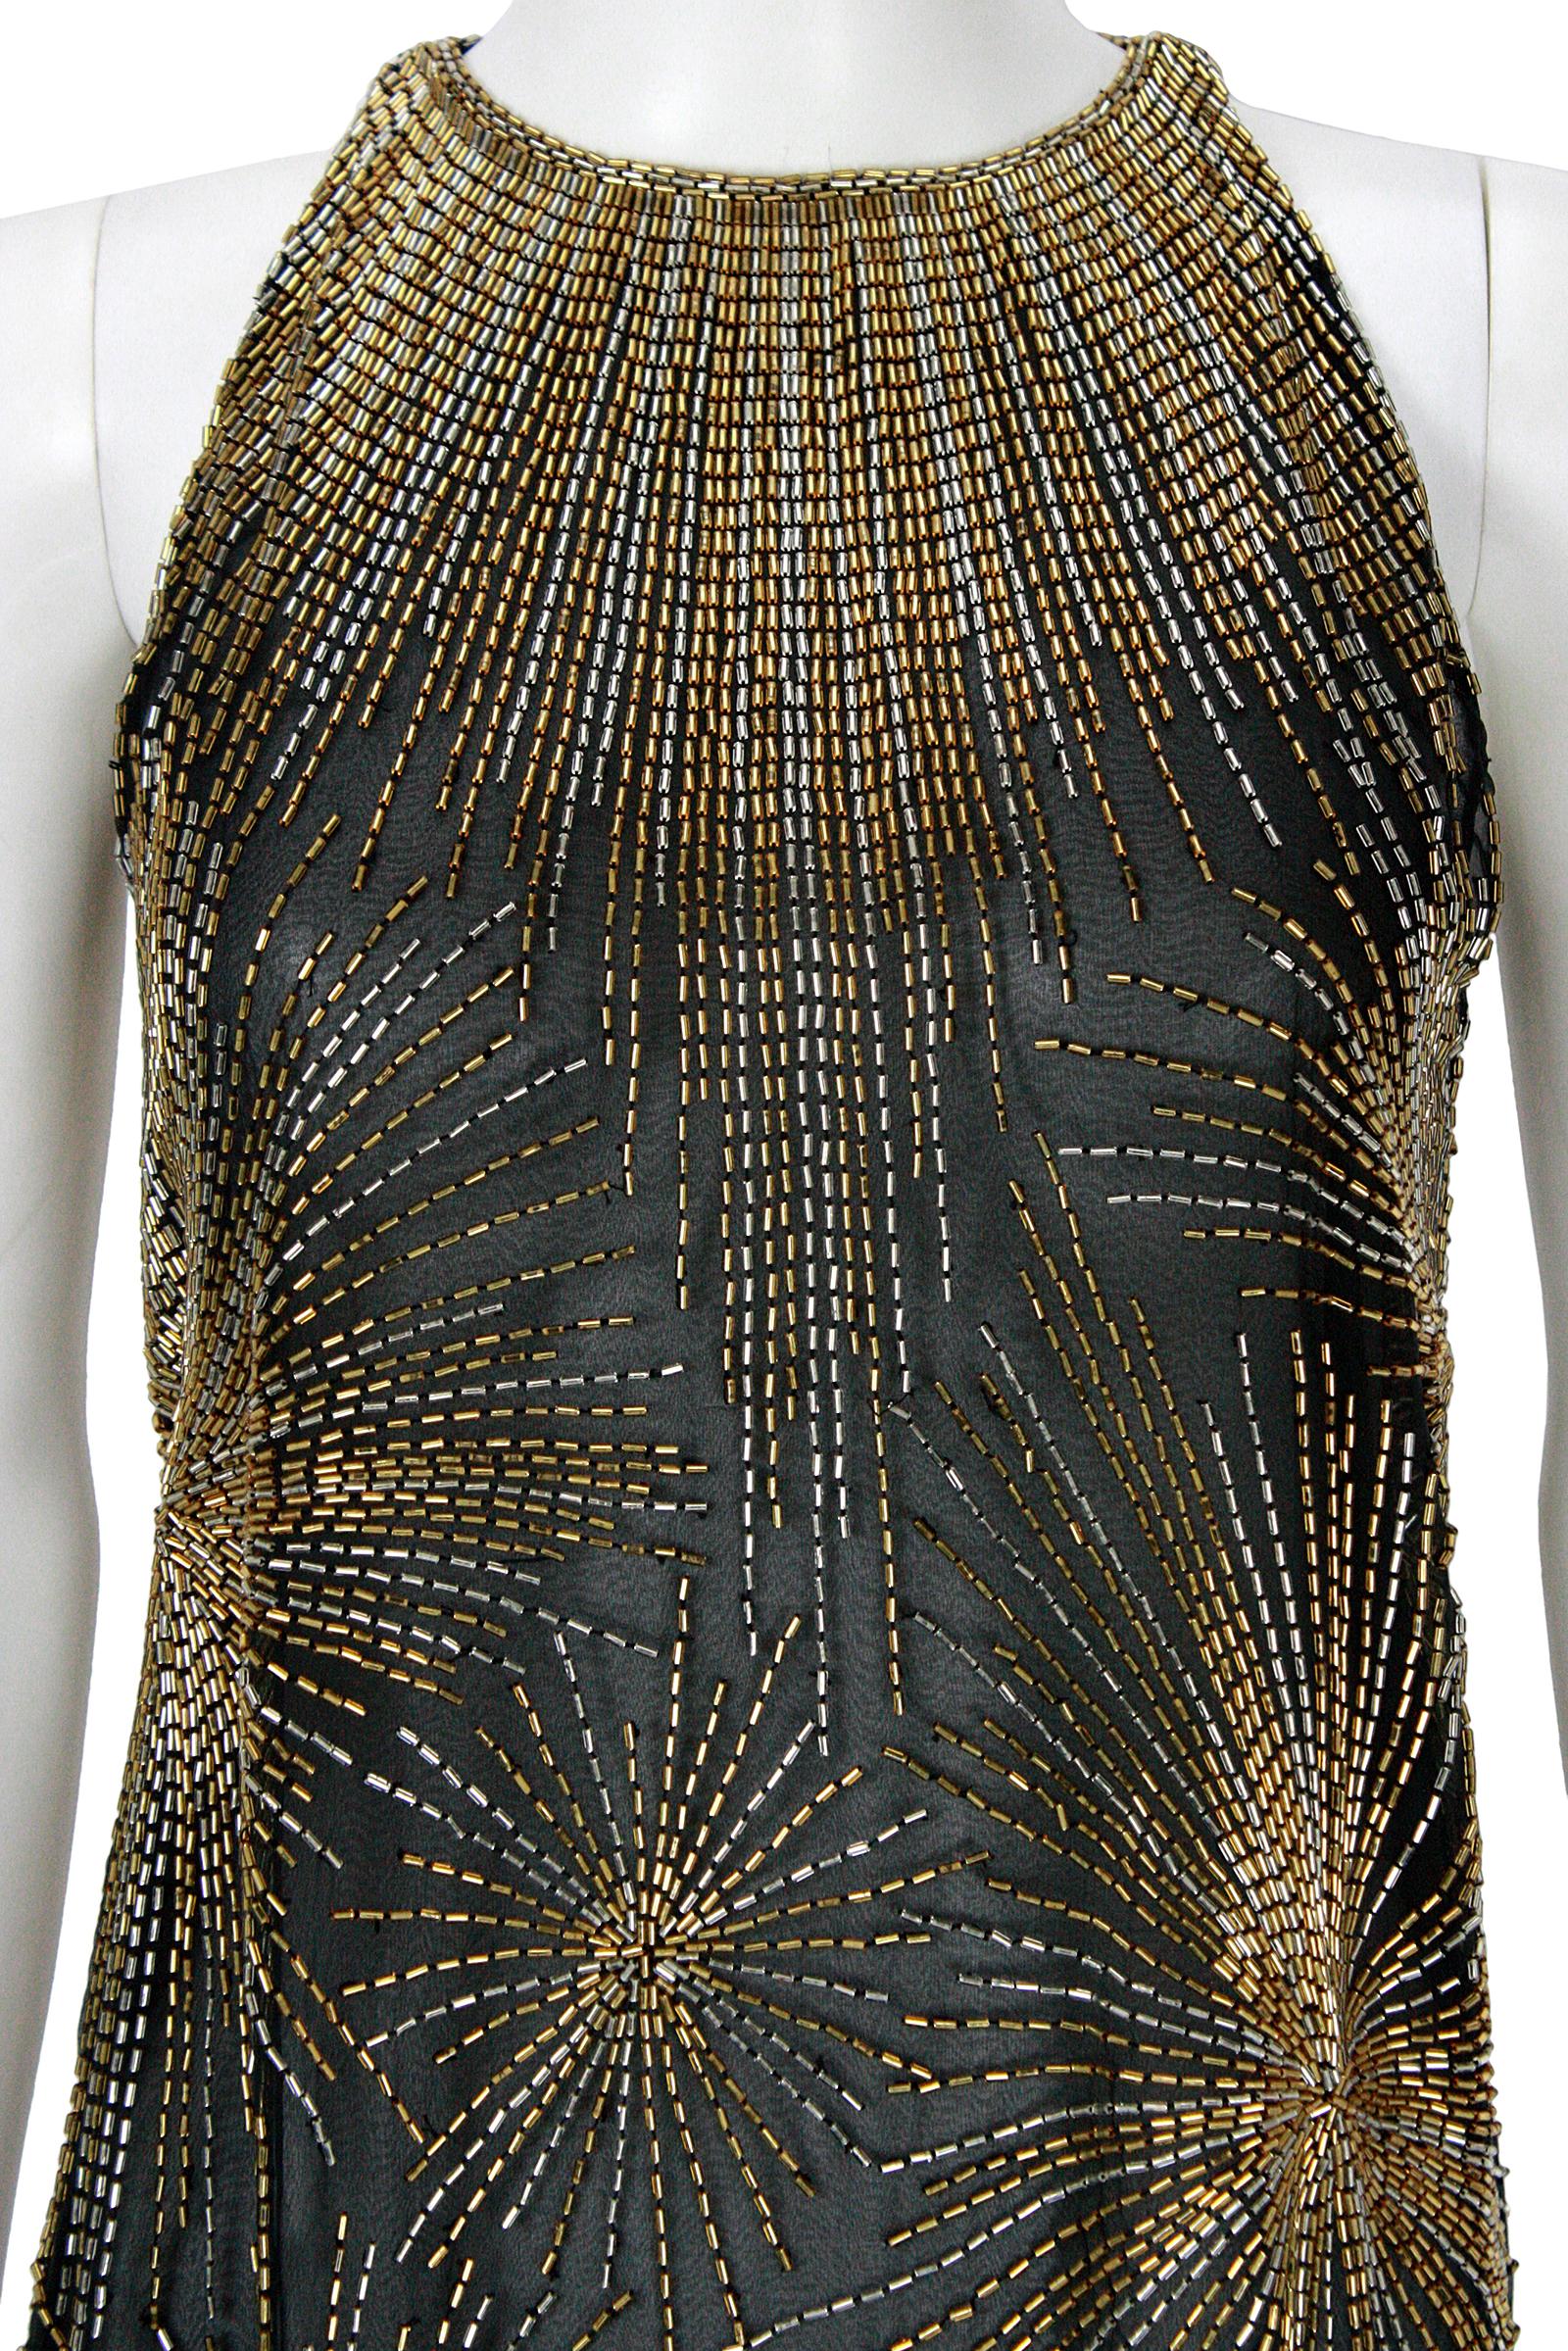 1970s Halston ICONIC 'FIREWORKS' beaded Black & Gold Gown with Jacket  2